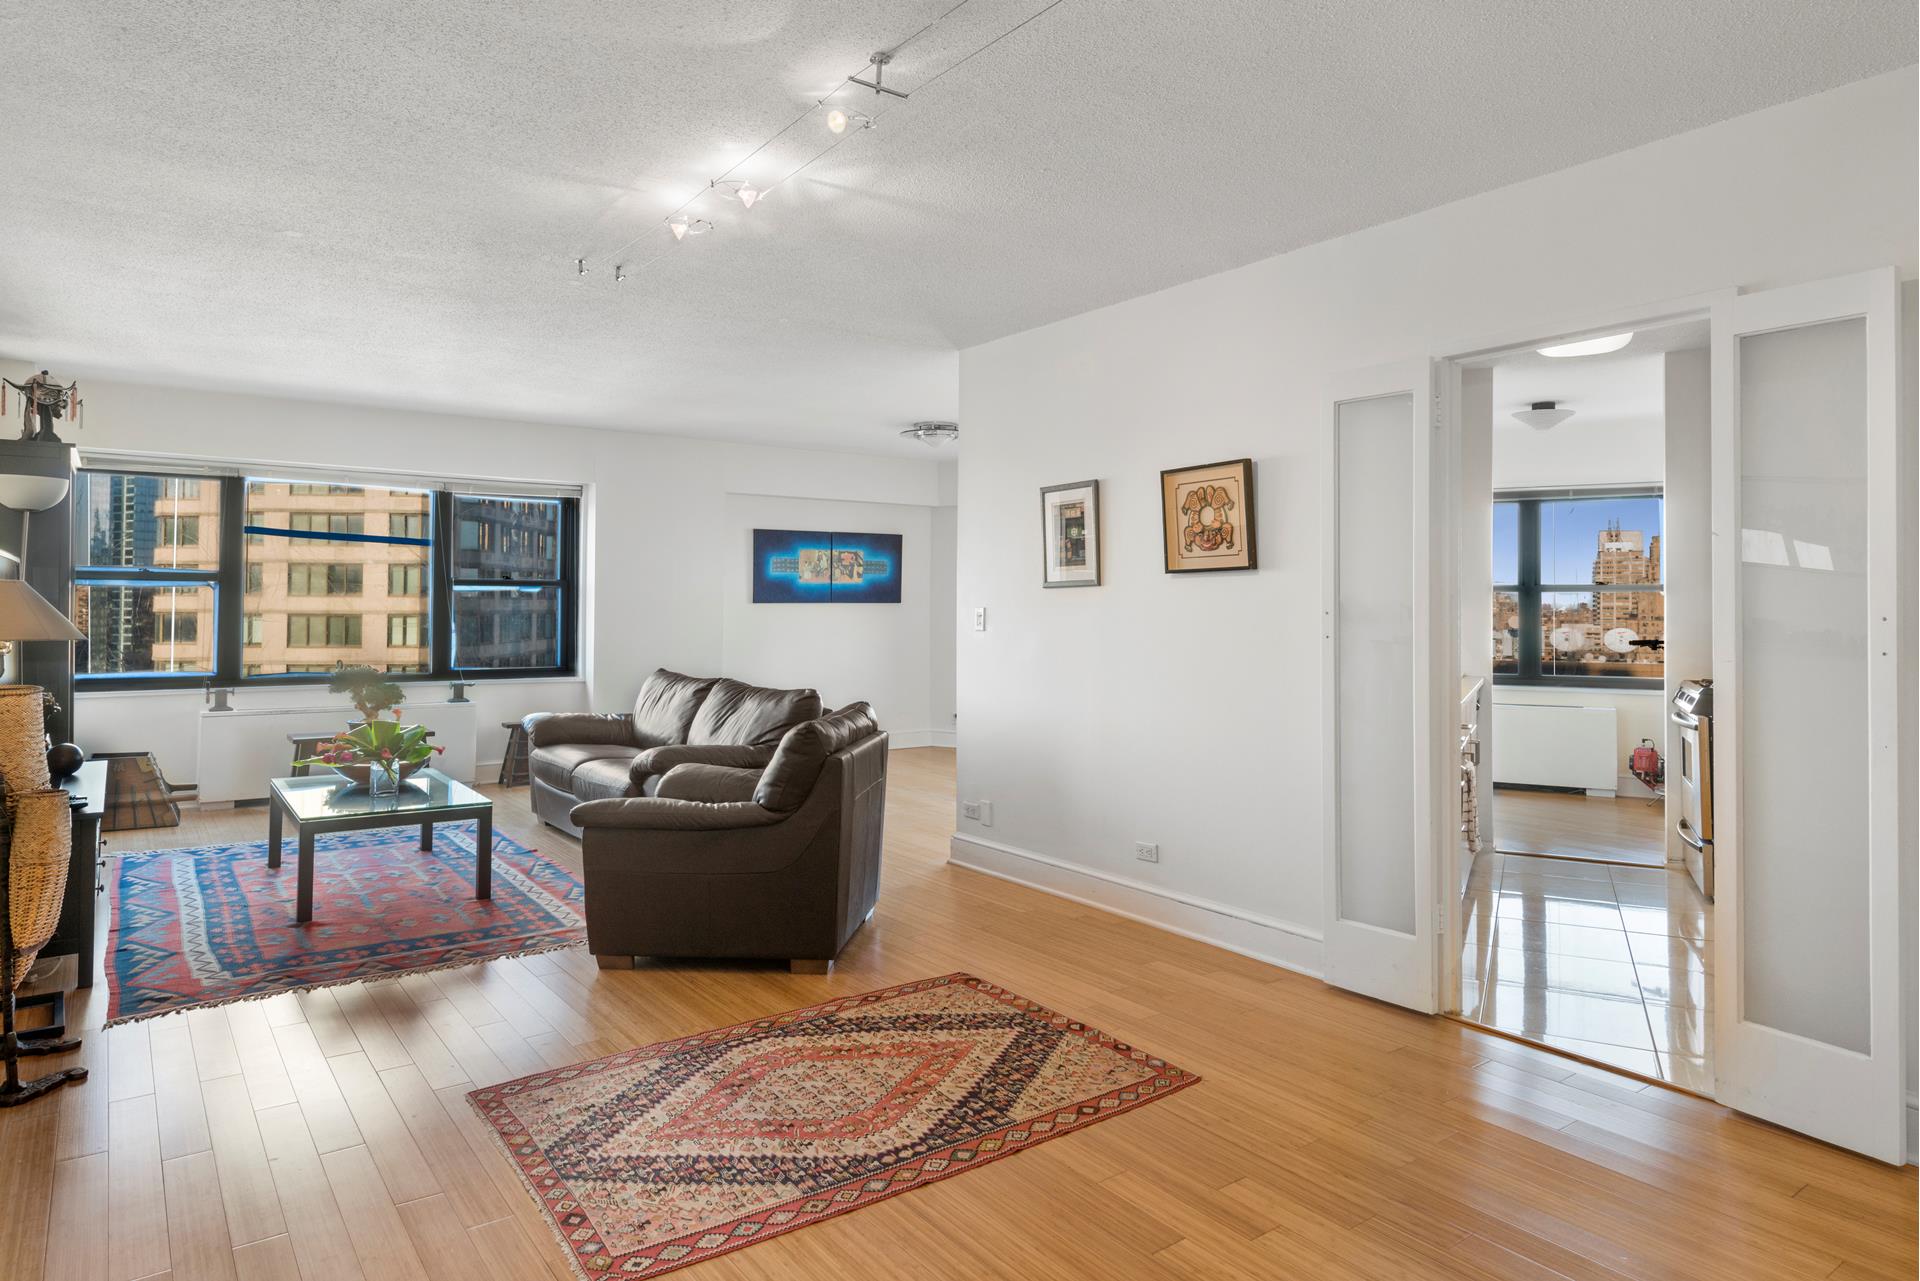 20 West 64th Street 23K, Lincoln Sq, Upper West Side, NYC - 2 Bedrooms  
2.5 Bathrooms  
5 Rooms - 